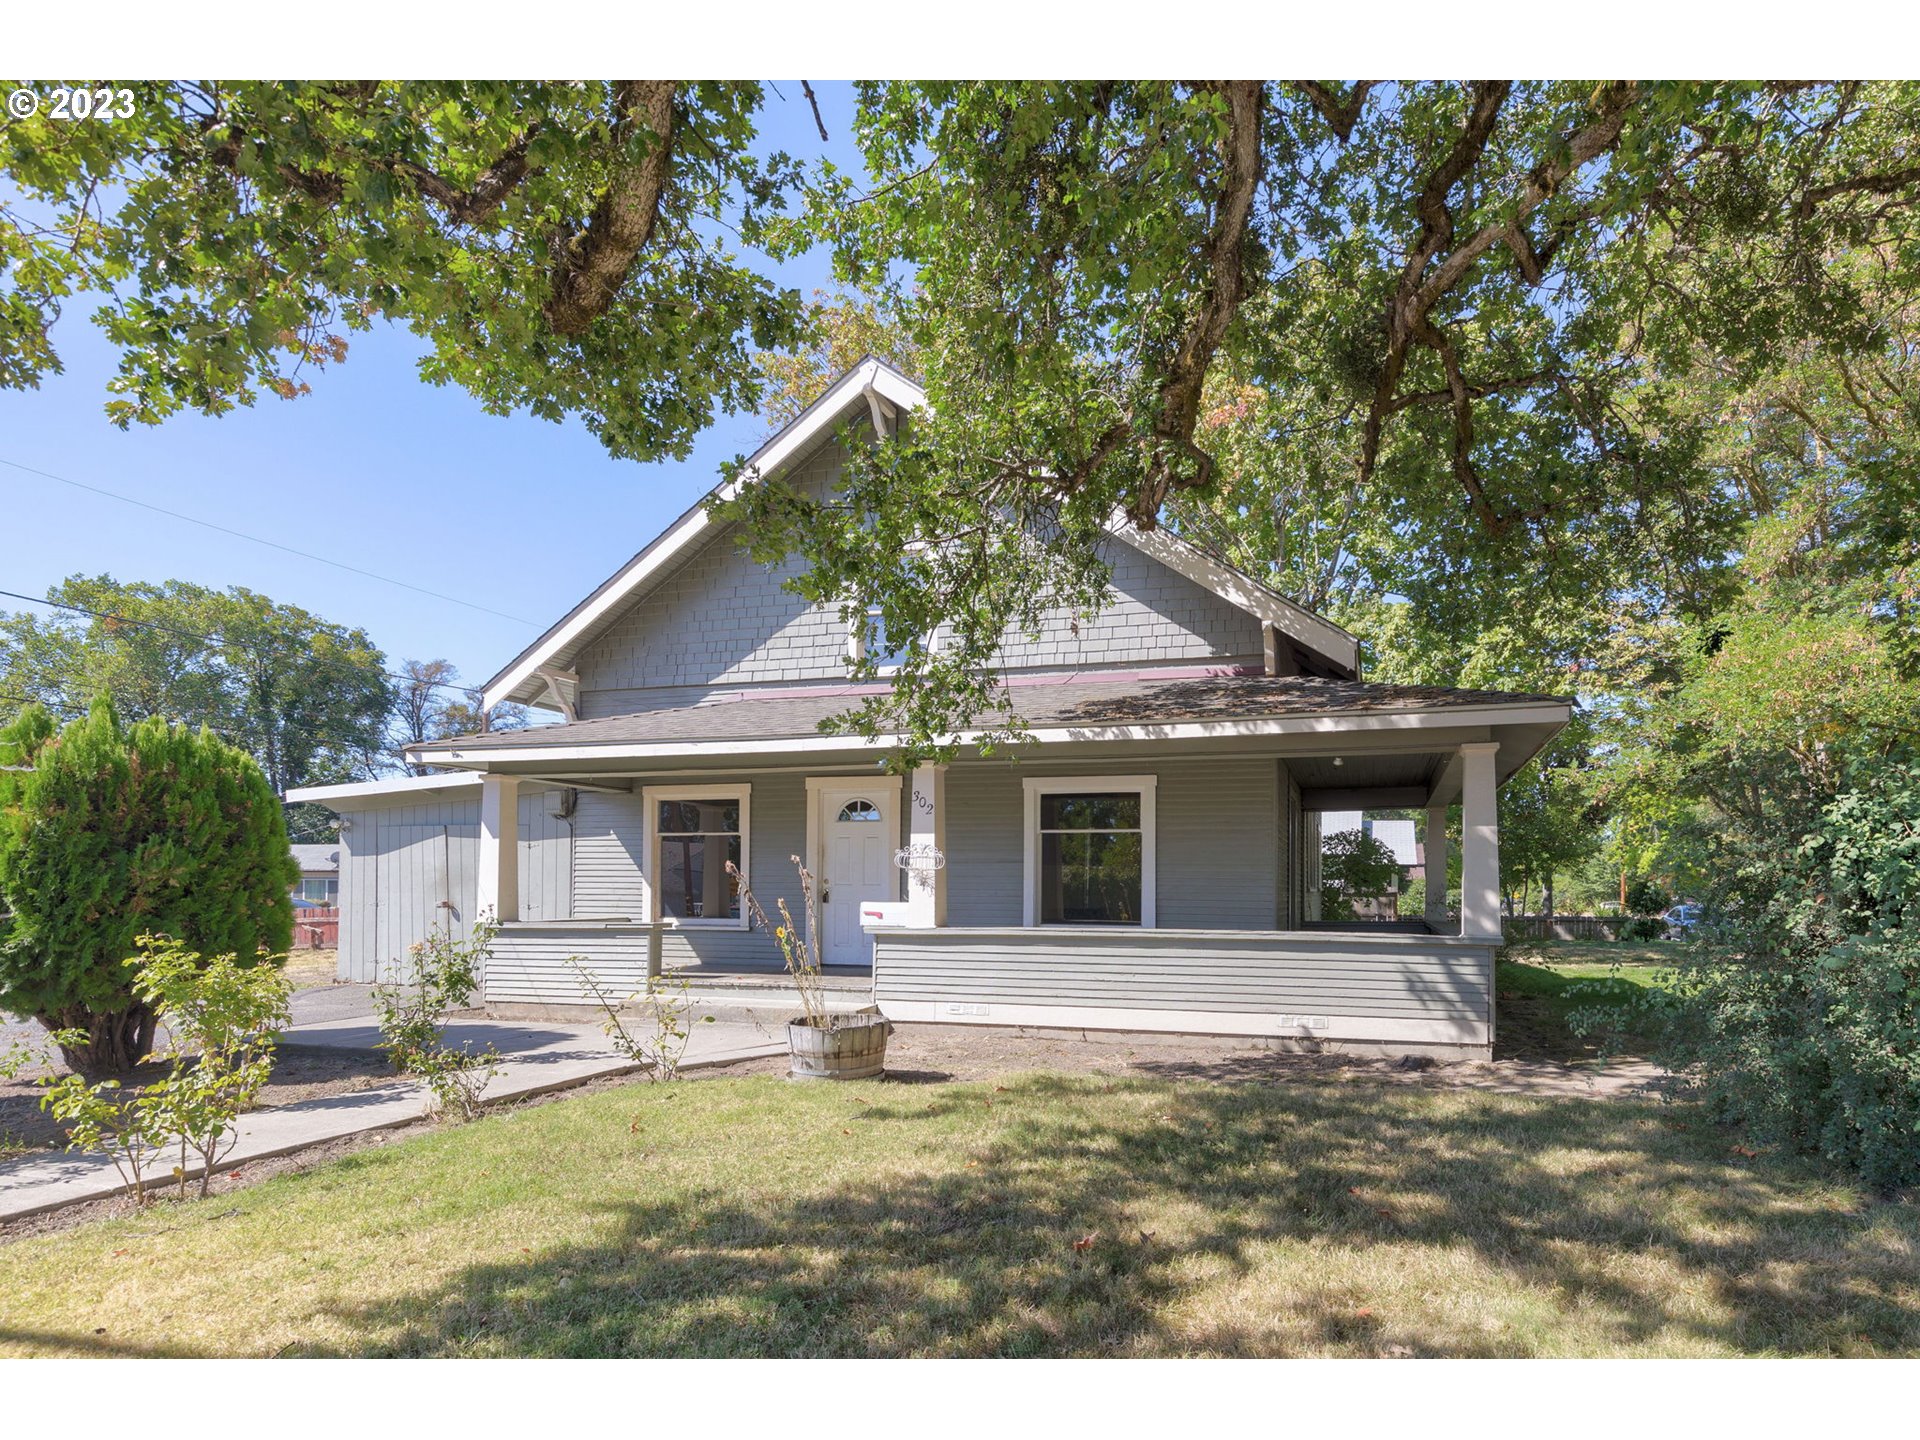 302 SW PINE ST, Grants Pass, OR 